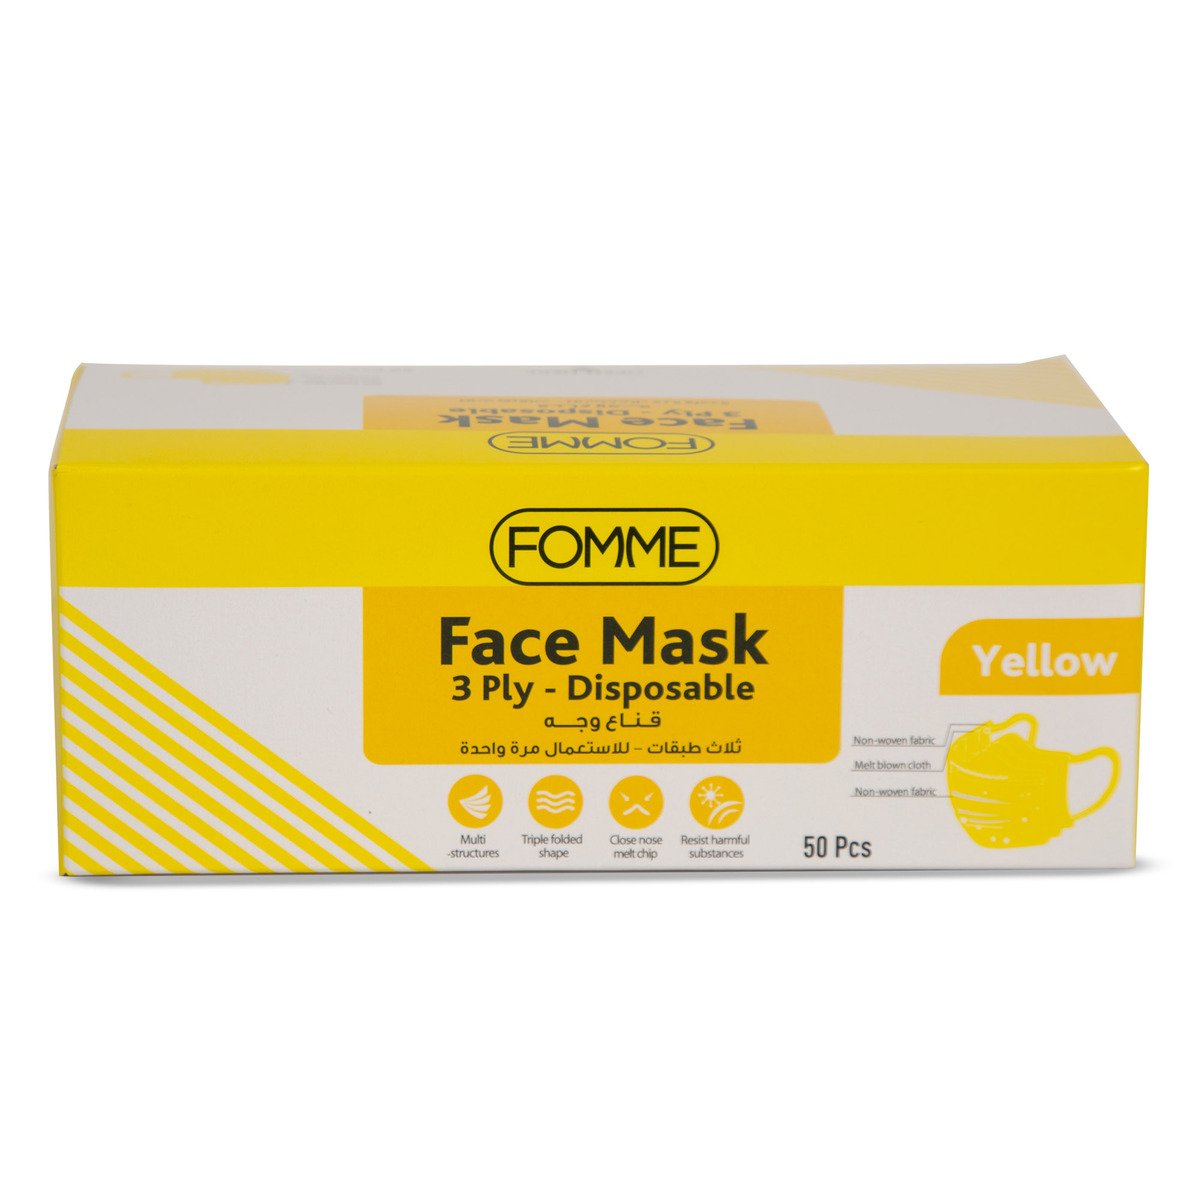 Fomme Disposable Face Mask Yellow 3ply 50pcs